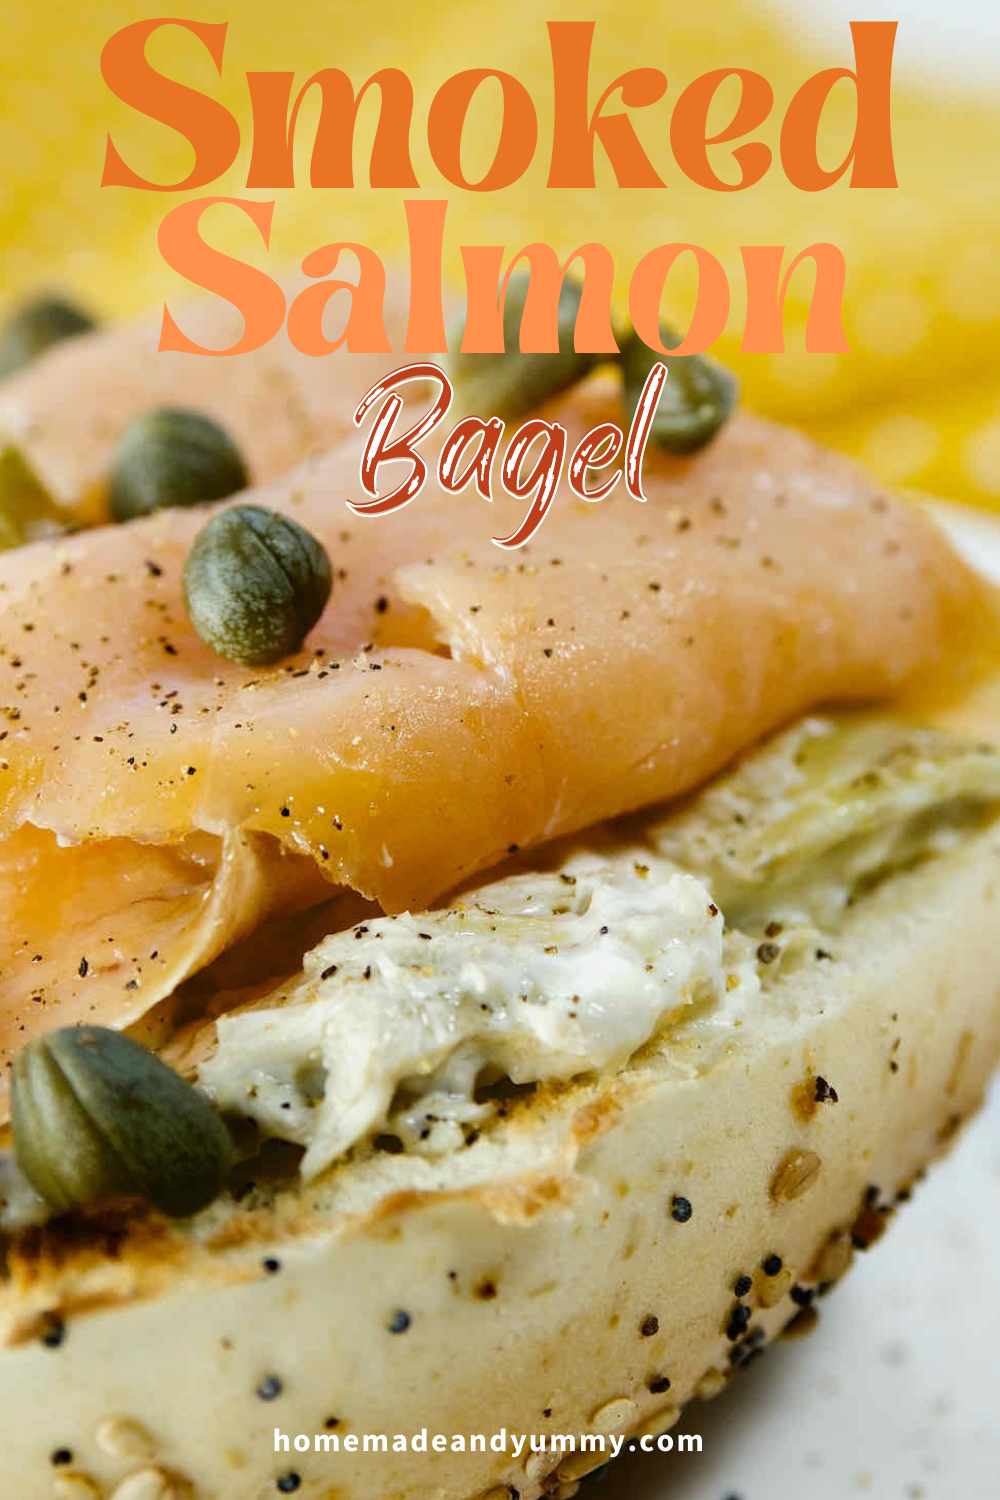 Bagel with cream cheese and salmon pin image.